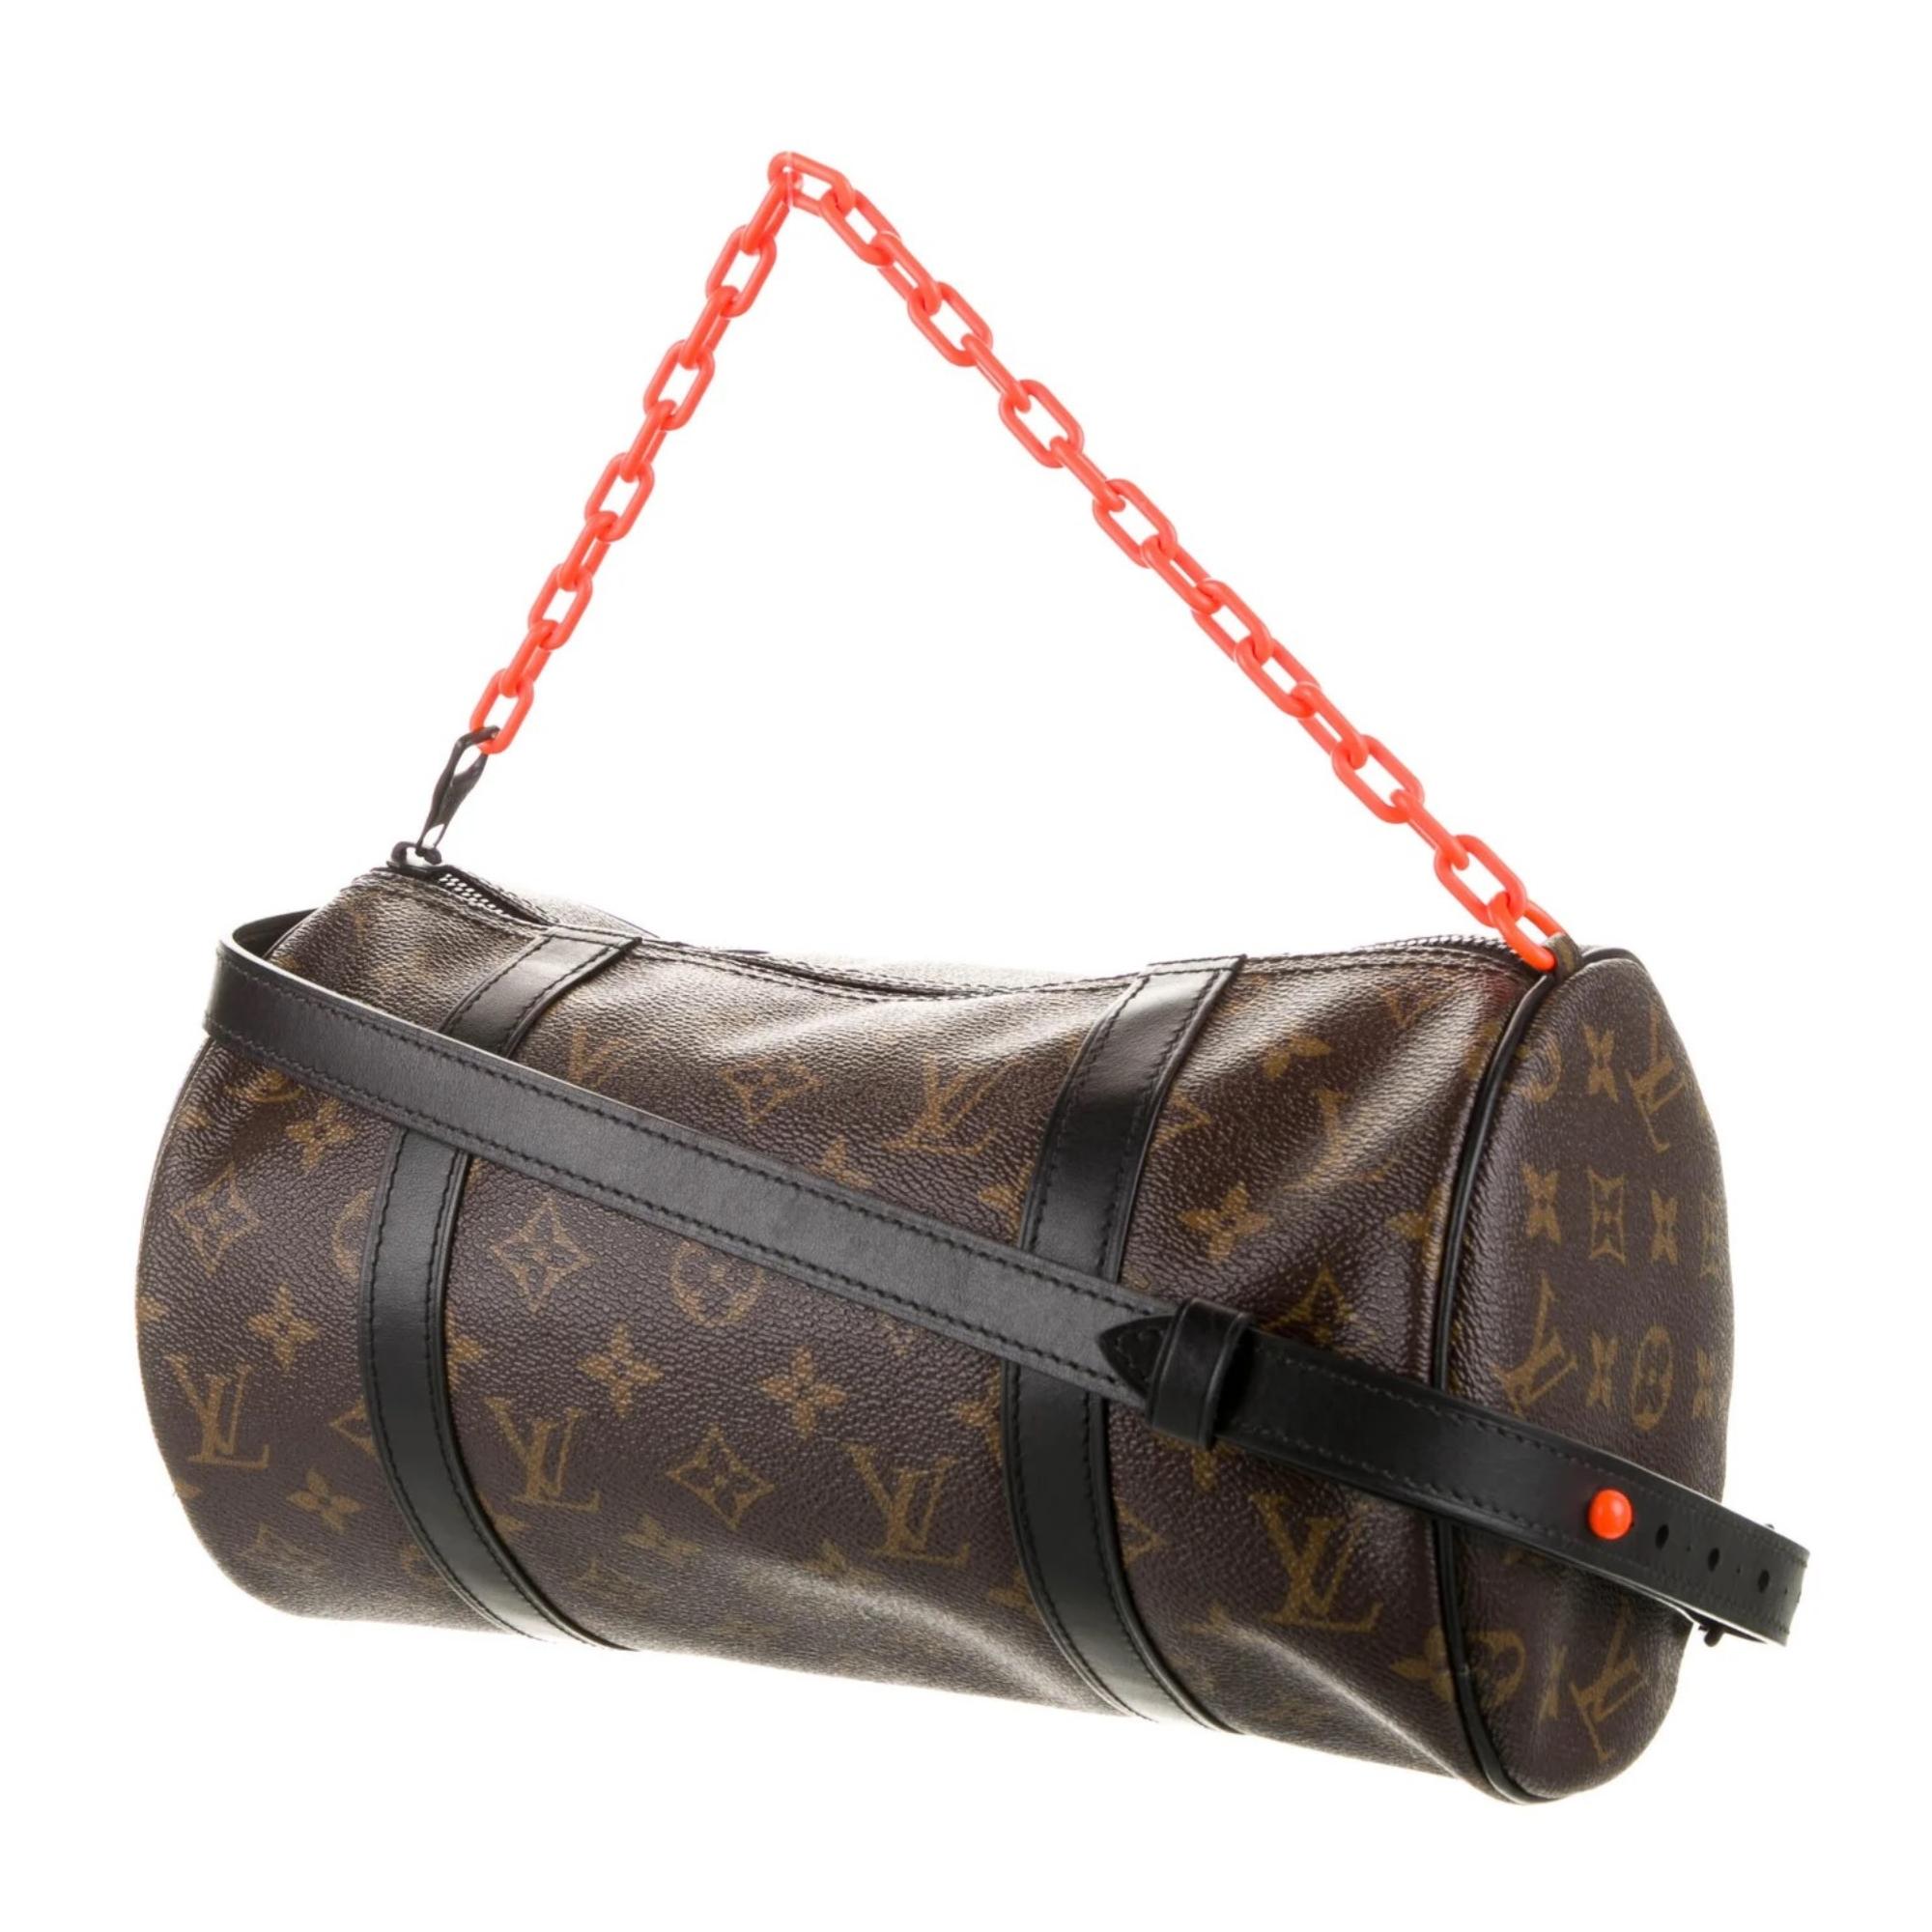 Louis Vuitton Shoulder Bag. From the 2019 Collection by Virgil Abloh. Brown Coated Canvas. LV Monogram. Tonal Hardware. Leather Trim. Chain-Link Handle & Adjustable Waist Strap. Leather Trim finishes. Canvas Lining. Zip Closure at Top.

Color: Brown